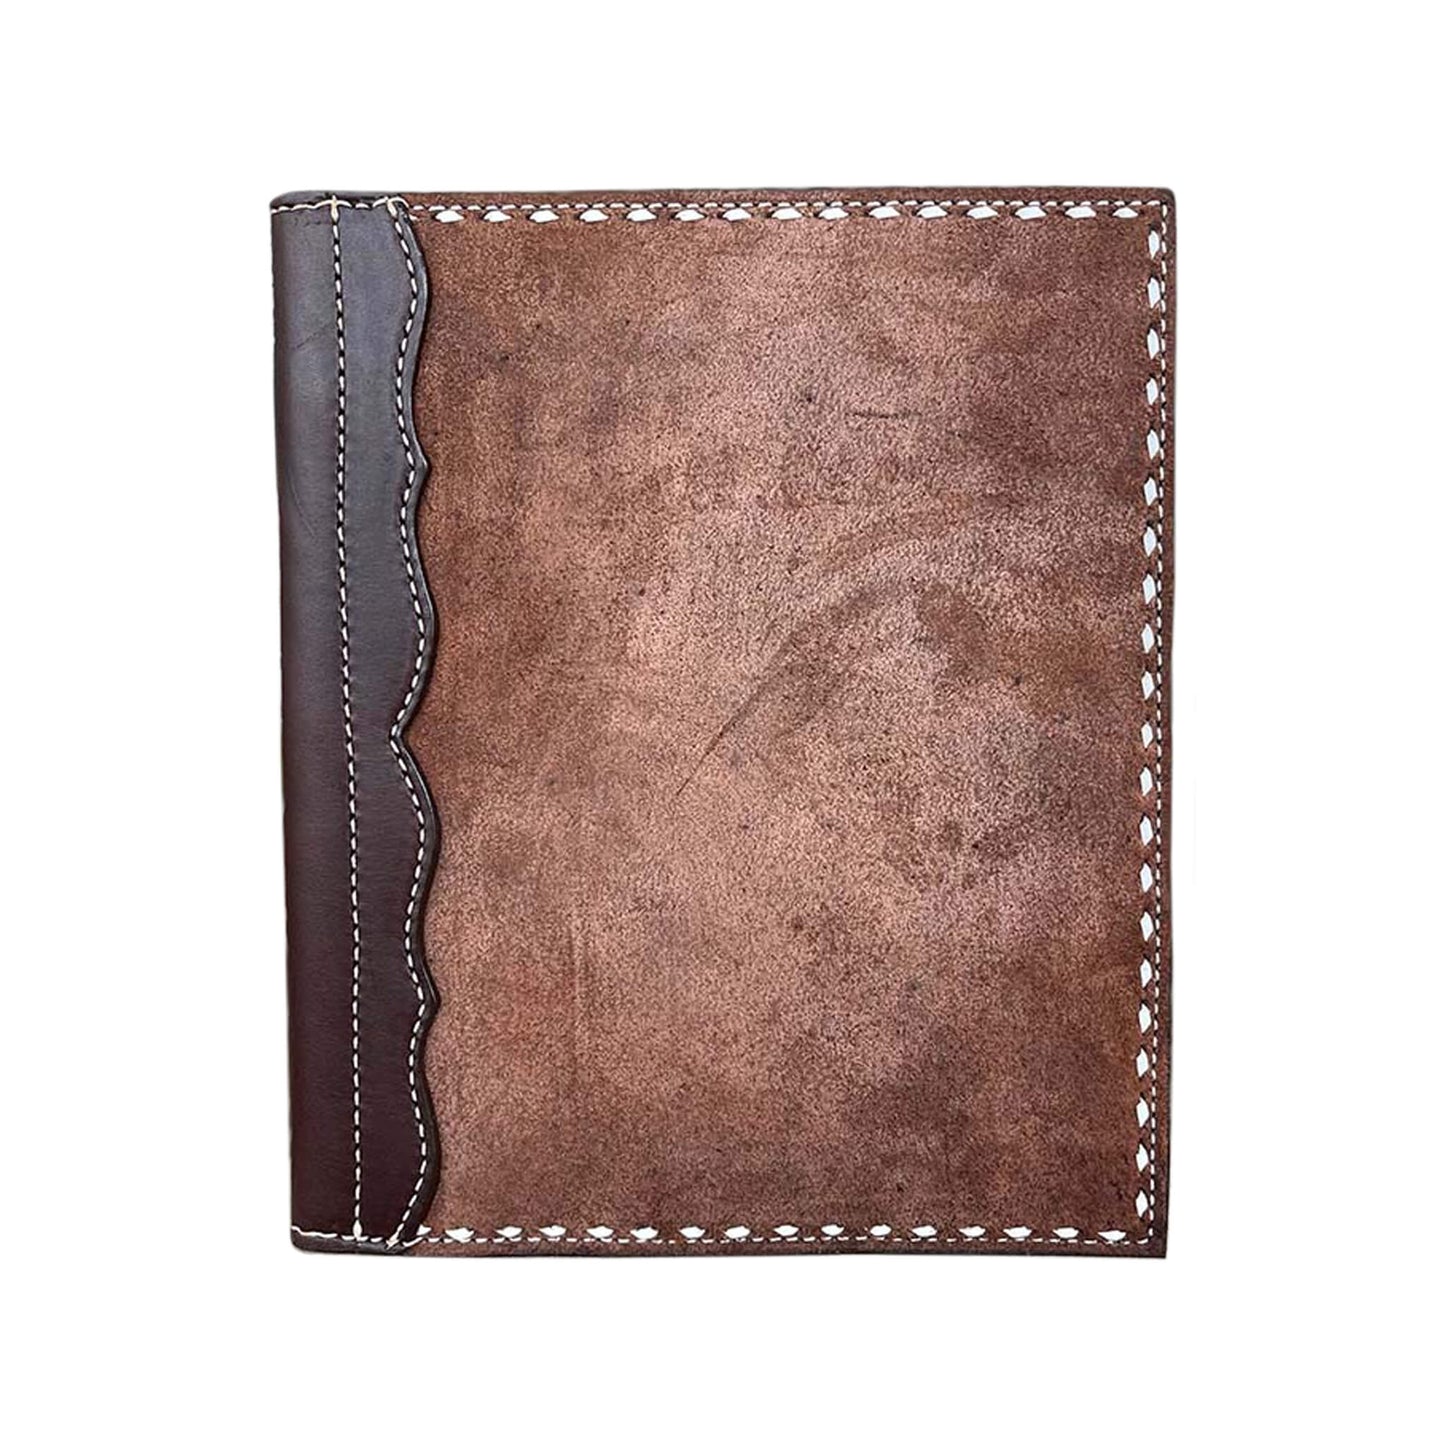 Large portfolio rough out chocolate leather with buckstitch